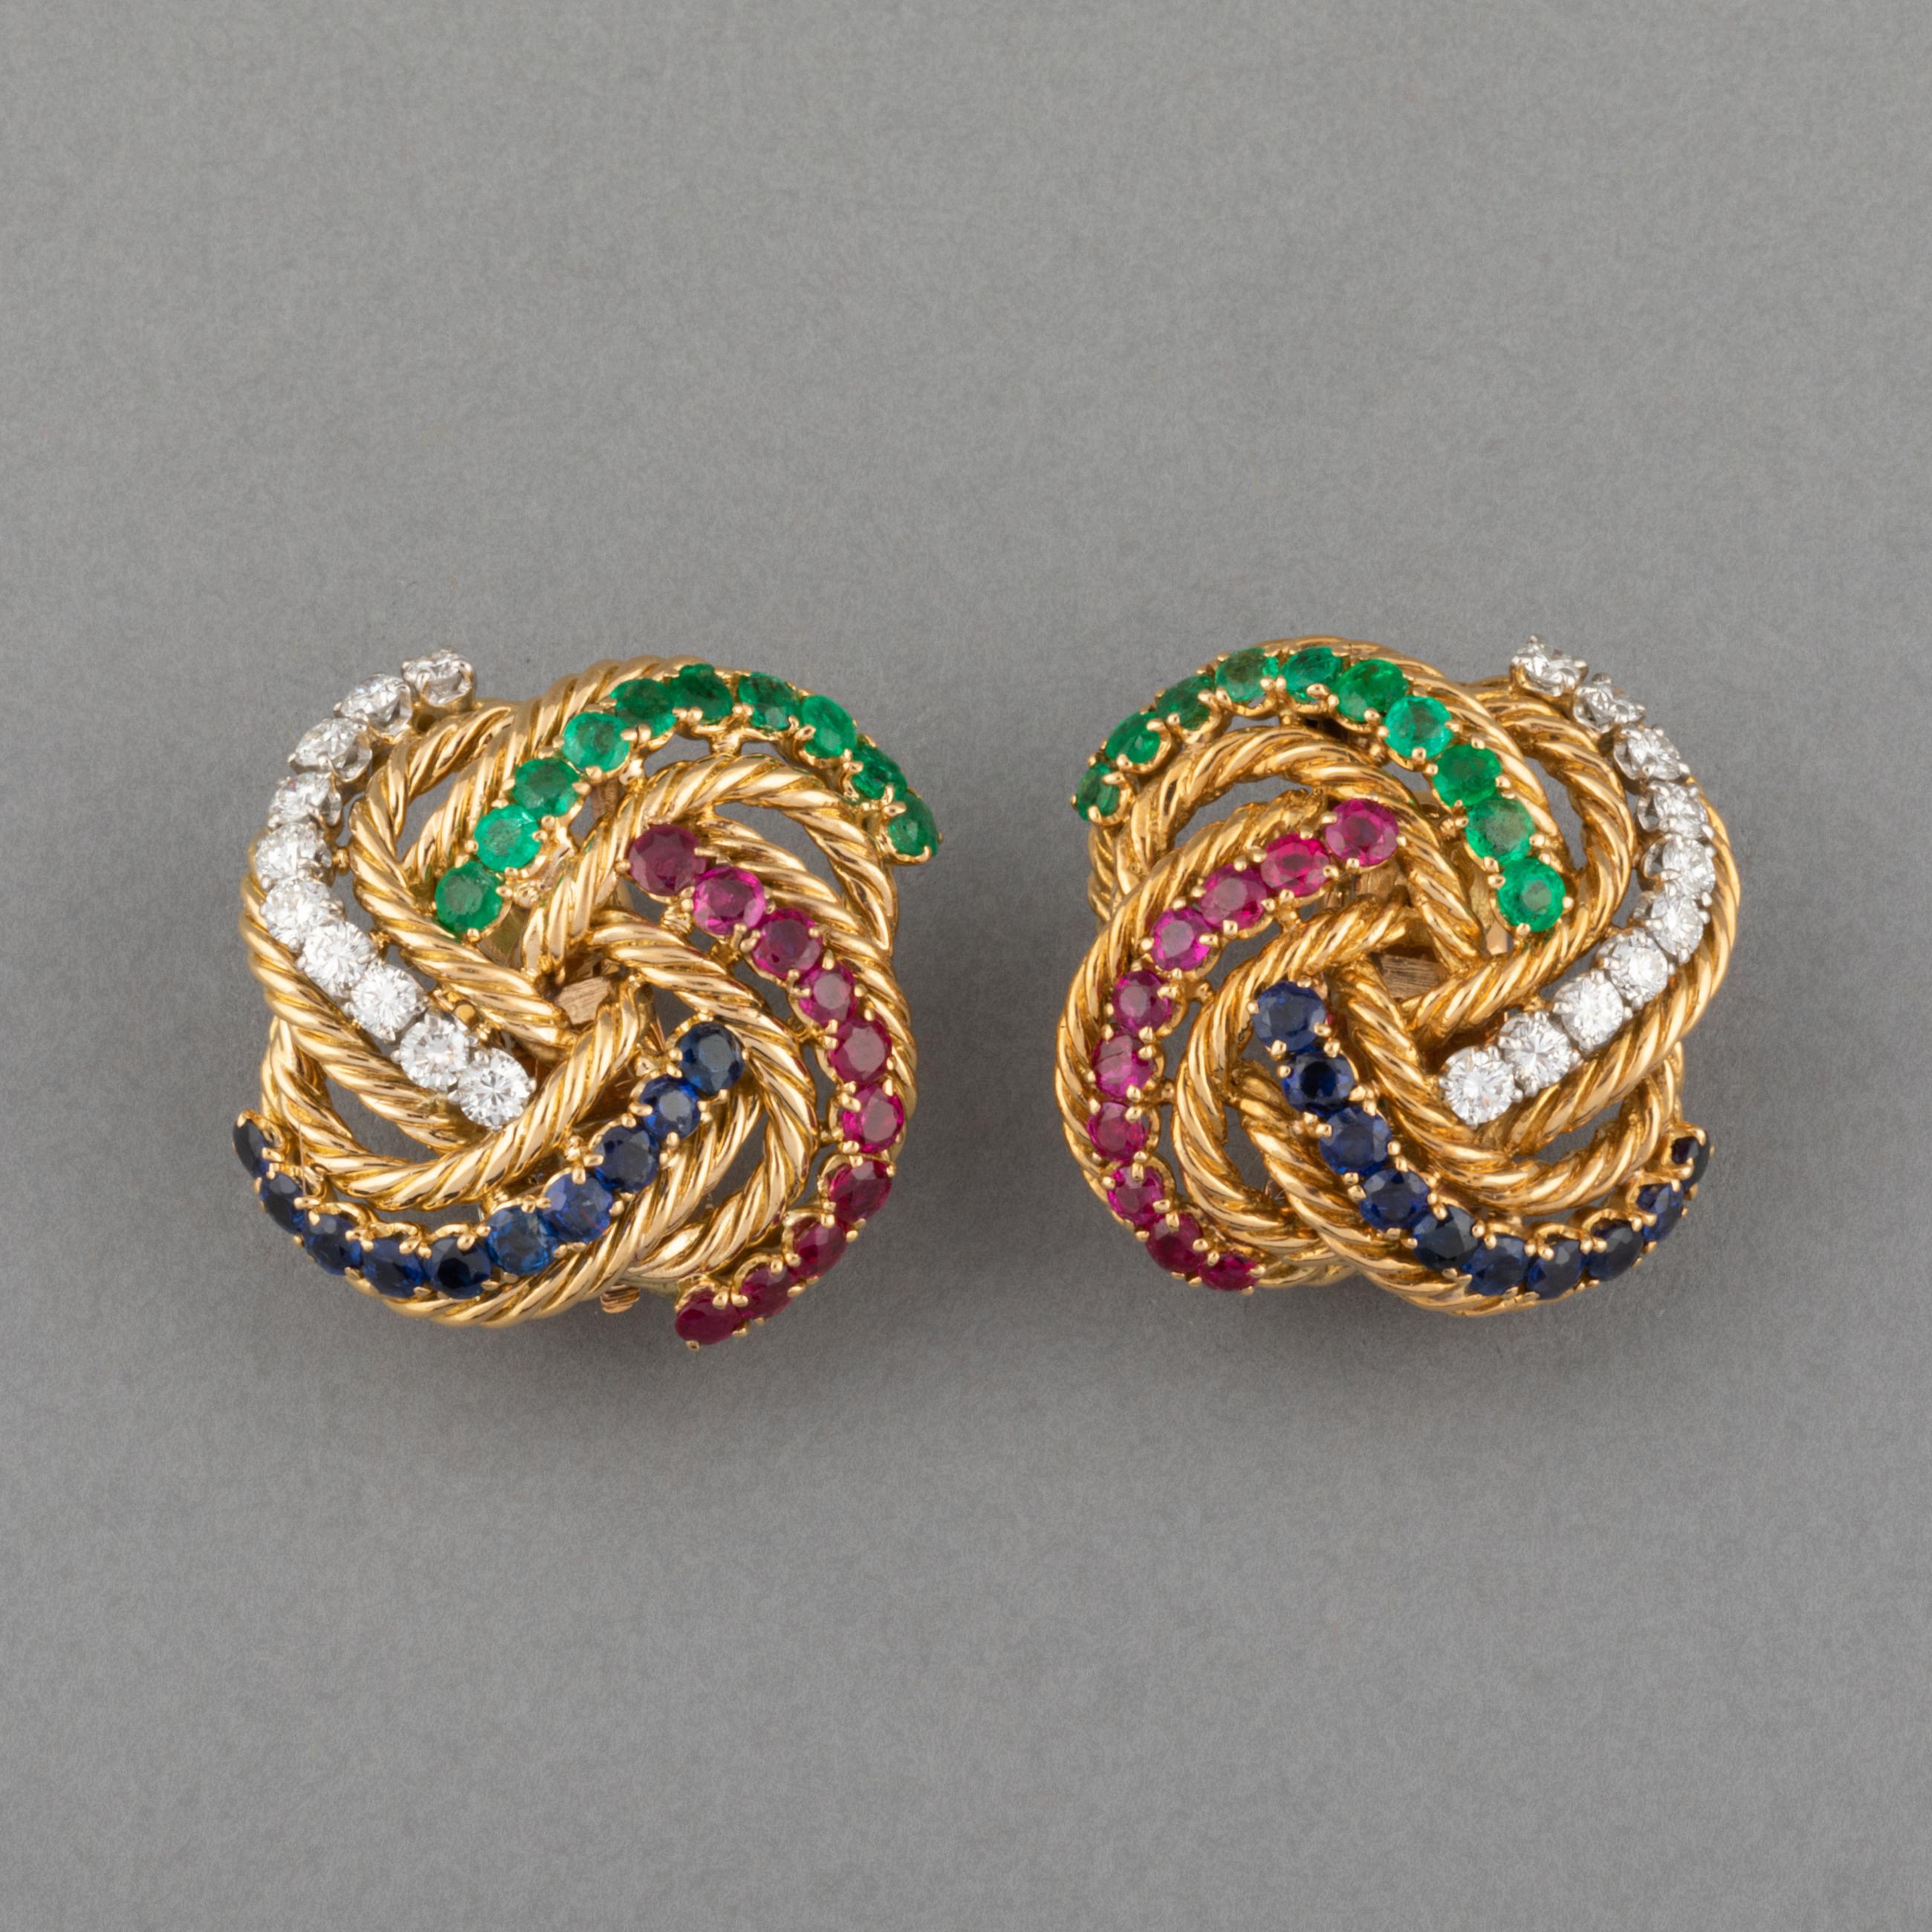 A lovely pair of vintage Boucheron Earrings made in France circa 1960.

Made in yellow gold 198k. Set with diamonds, sapphires, rubies and emeralds.

Dimensions: 24mm 

Weight: 25 grams